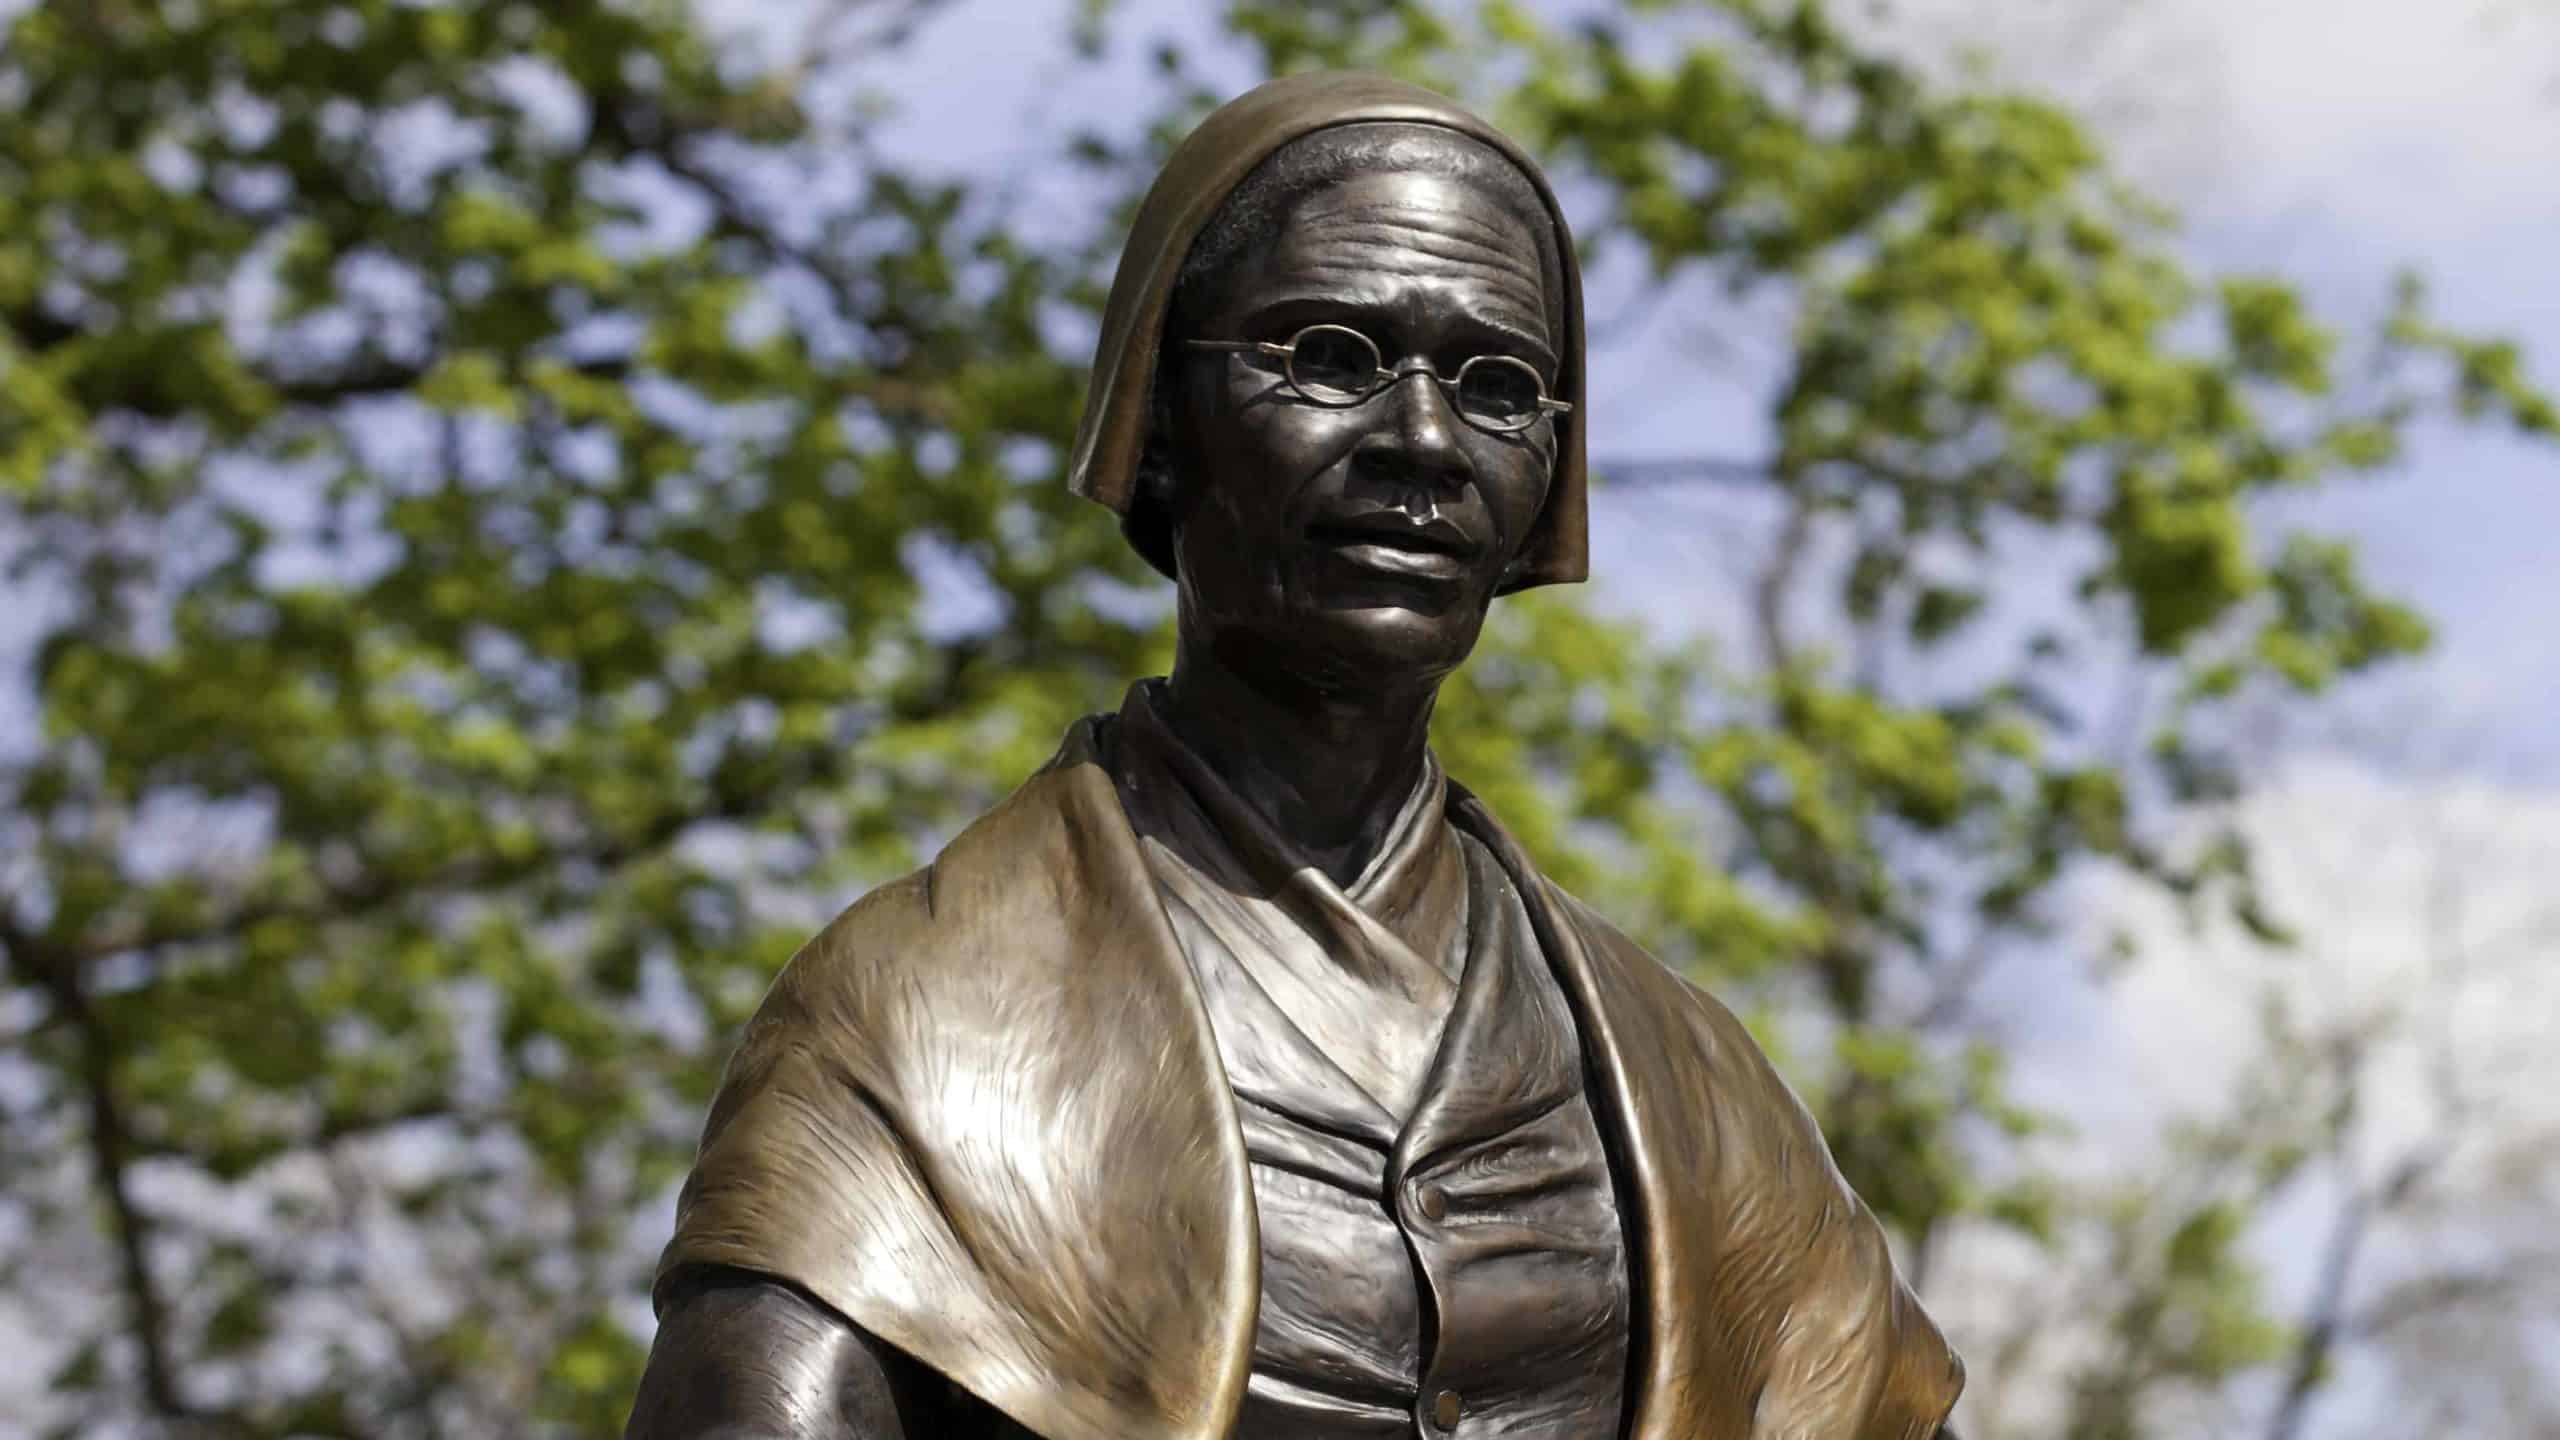 A memorial honors Sojourner Truth, a powerful nationally recognized advocate for women's rights and the abolition of slavery, who lived for a time in Northampton.